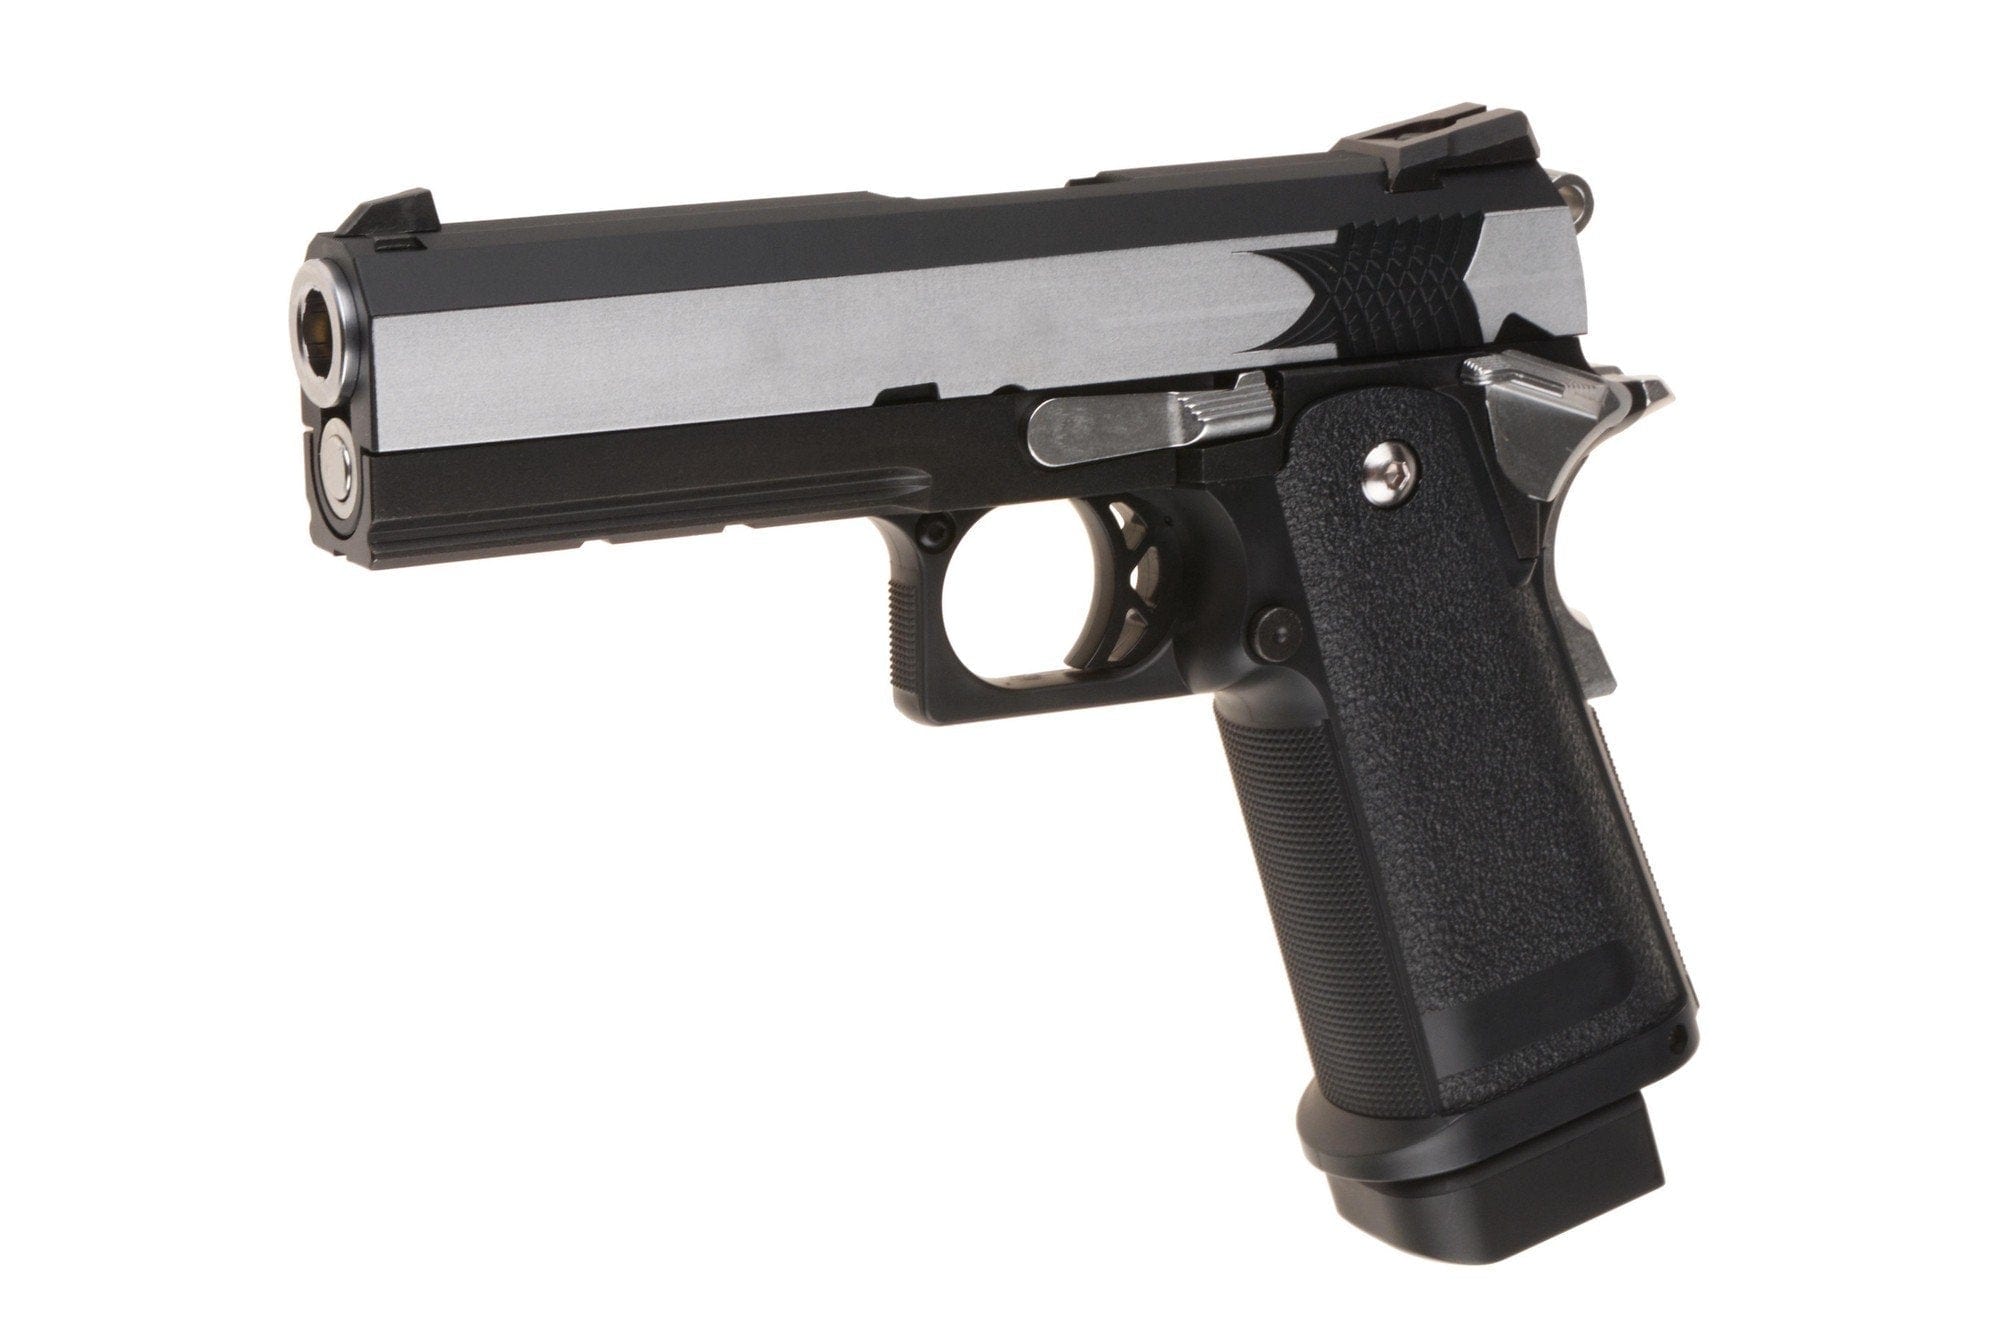 High Capa Extreme (Full Auto) Pistol Replica by Tokyo Marui on Airsoft Mania Europe